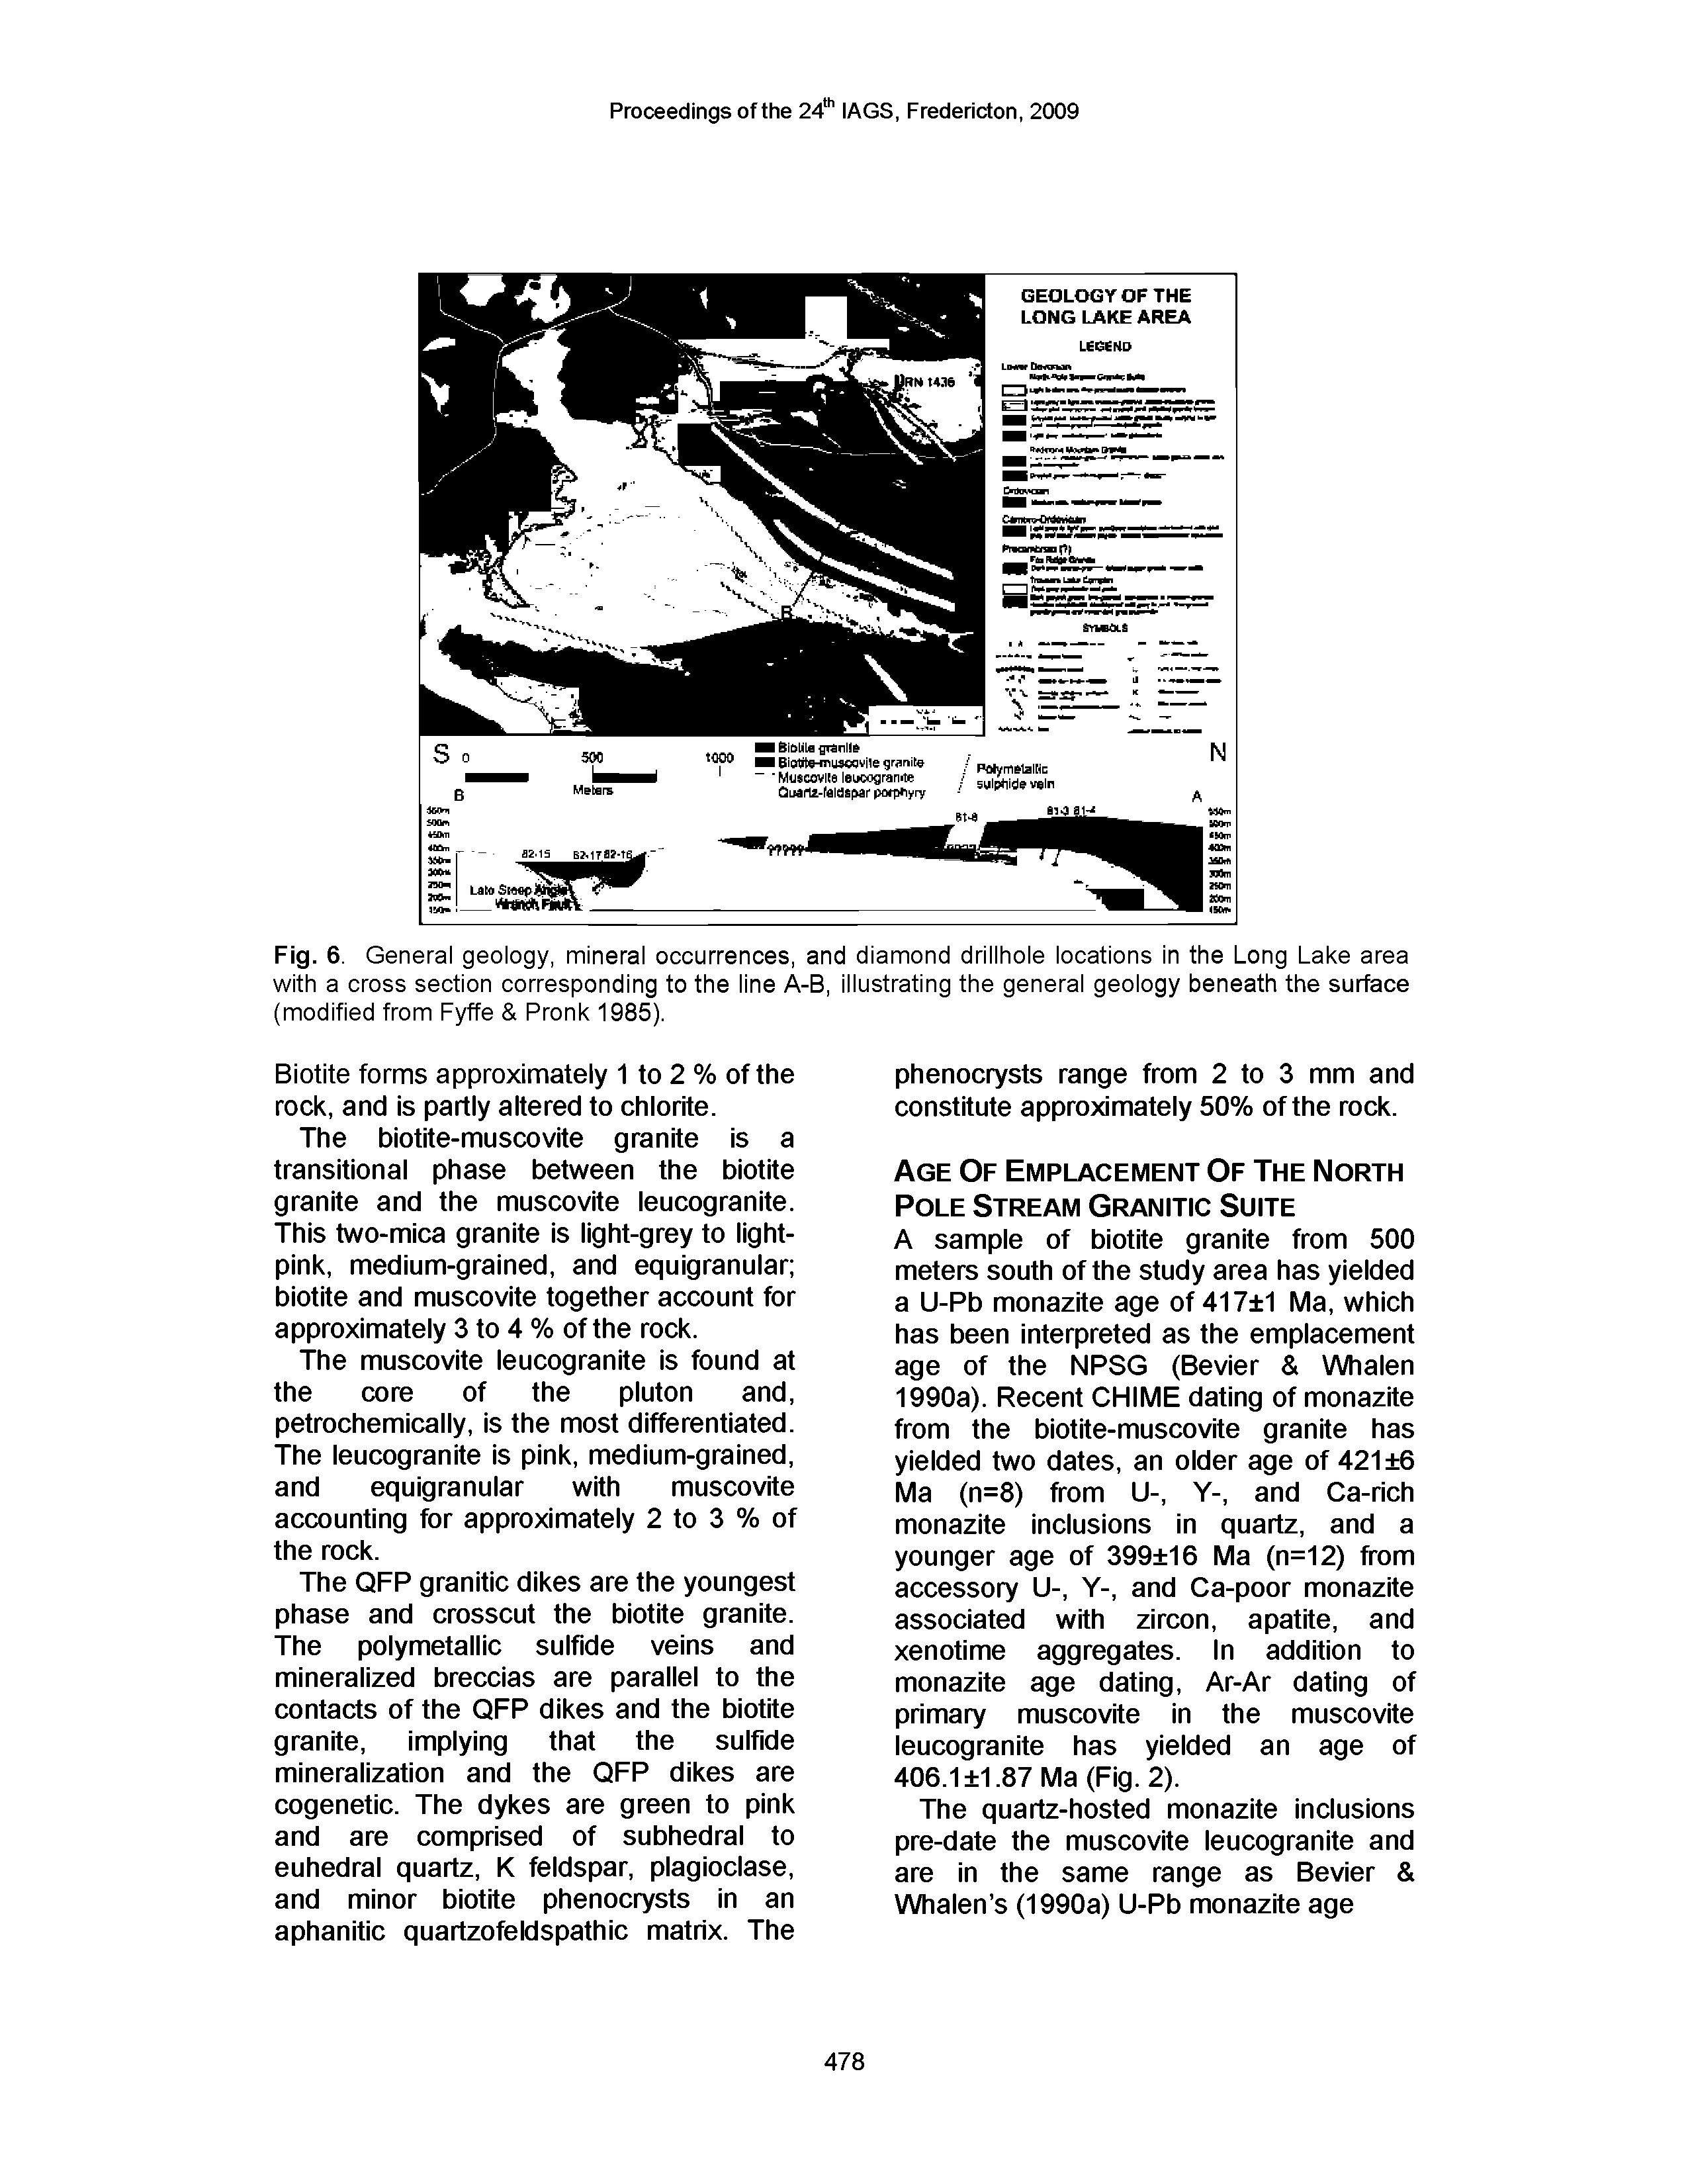 Fig. 6. General geology, mineral occurrences, and diamond drillhole locations In the Long Lake area with a cross section corresponding to the line A-B, Illustrating the general geology beneath the surface (modified from Fyffe Pronk 1985).